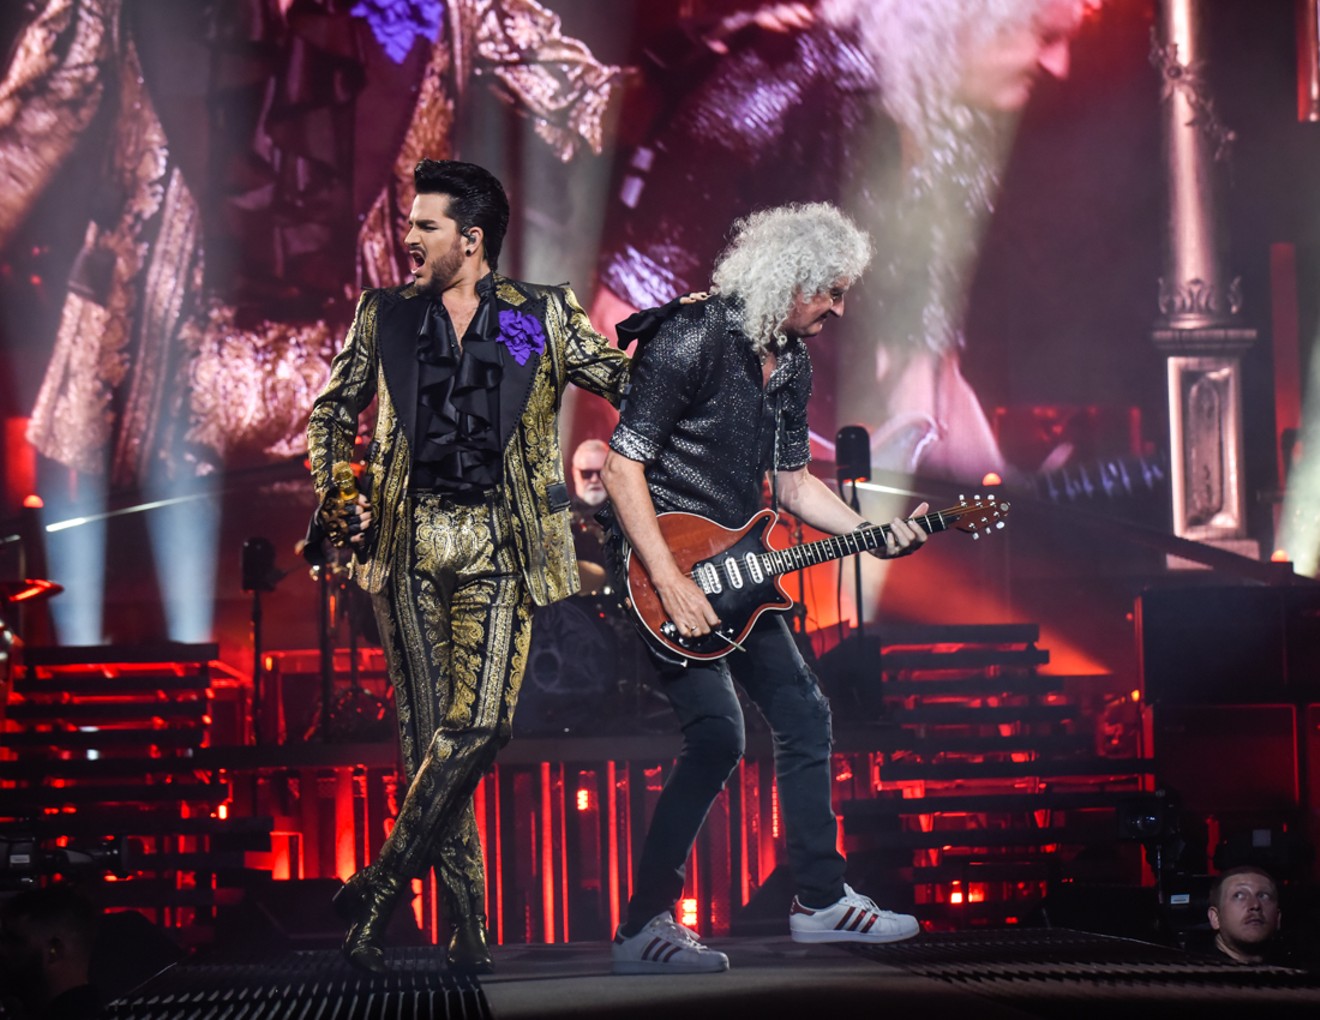 See more photos from Queen + Adam Lambert at the BB&T Center here.